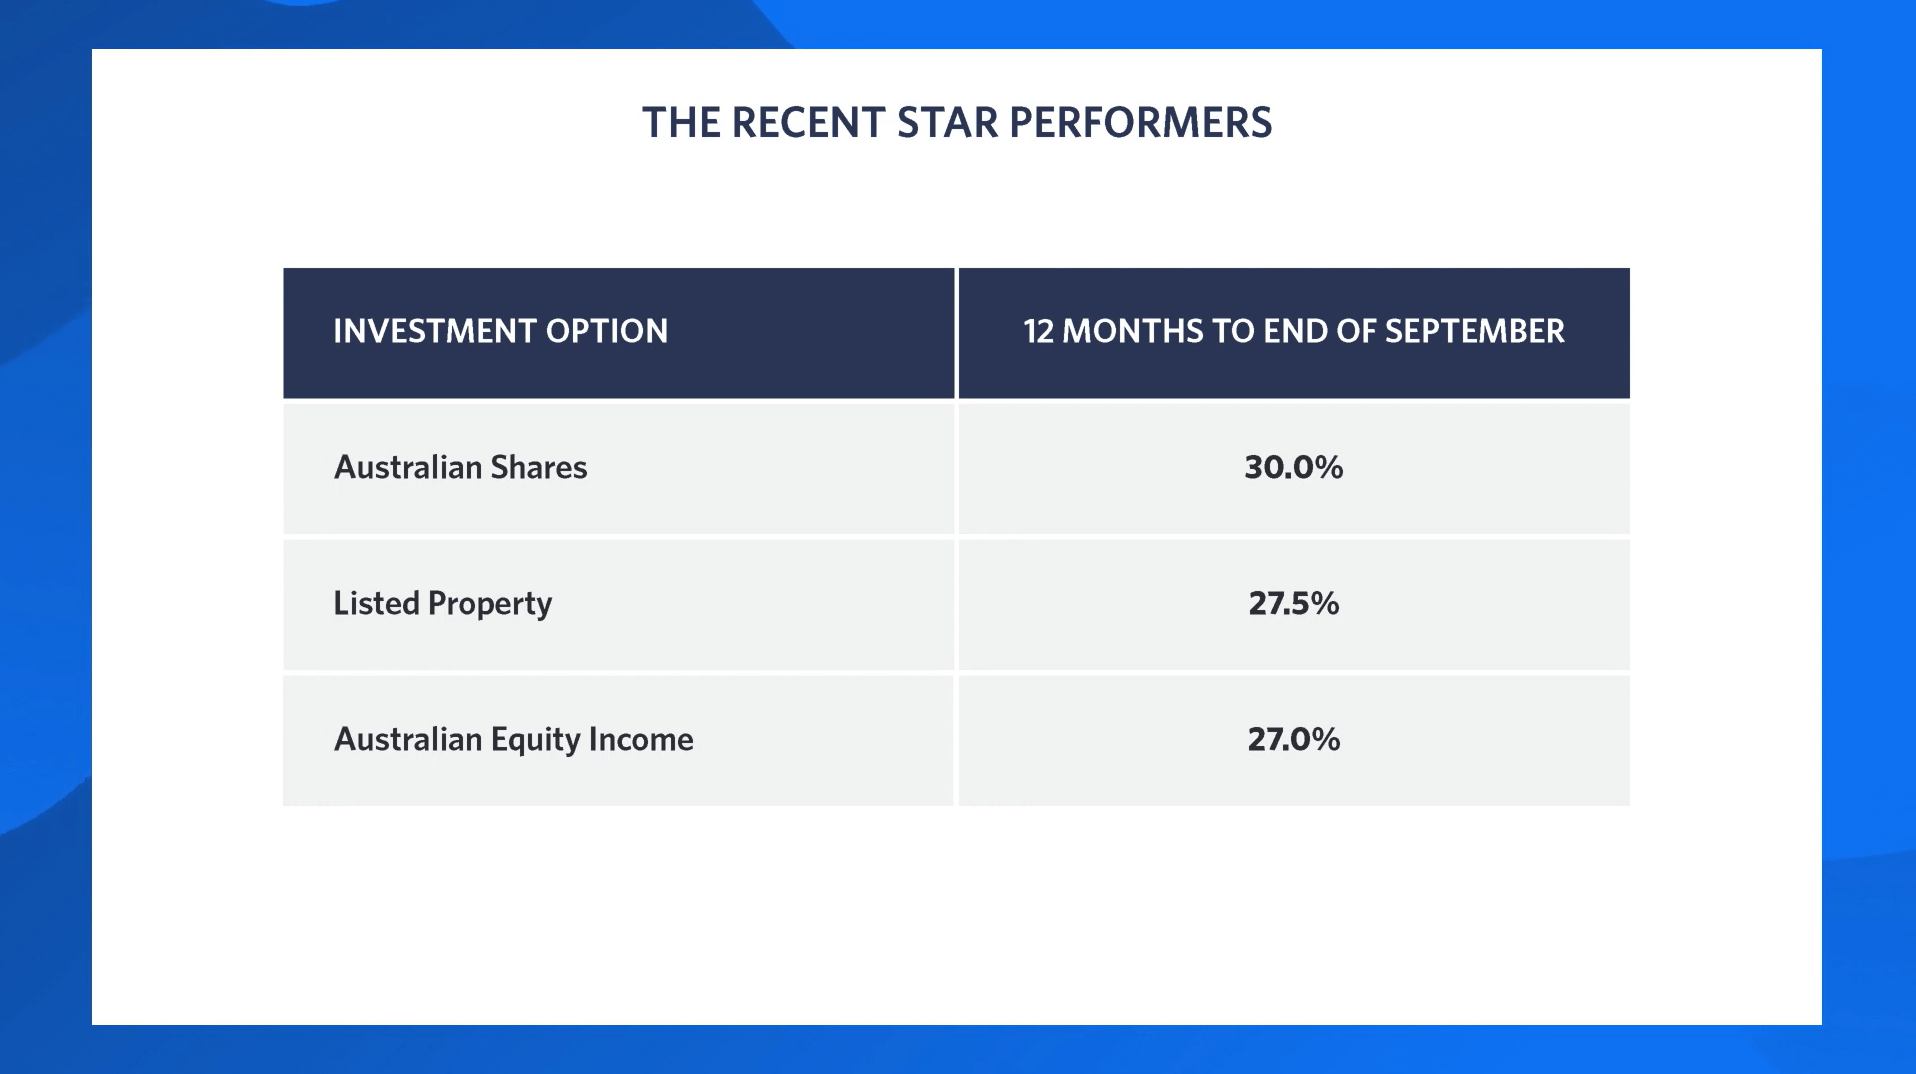 Chart 2: Chart showing the investment returns of UniSuper’s three top-performing investment options over the 12 months to the end of September 2021.